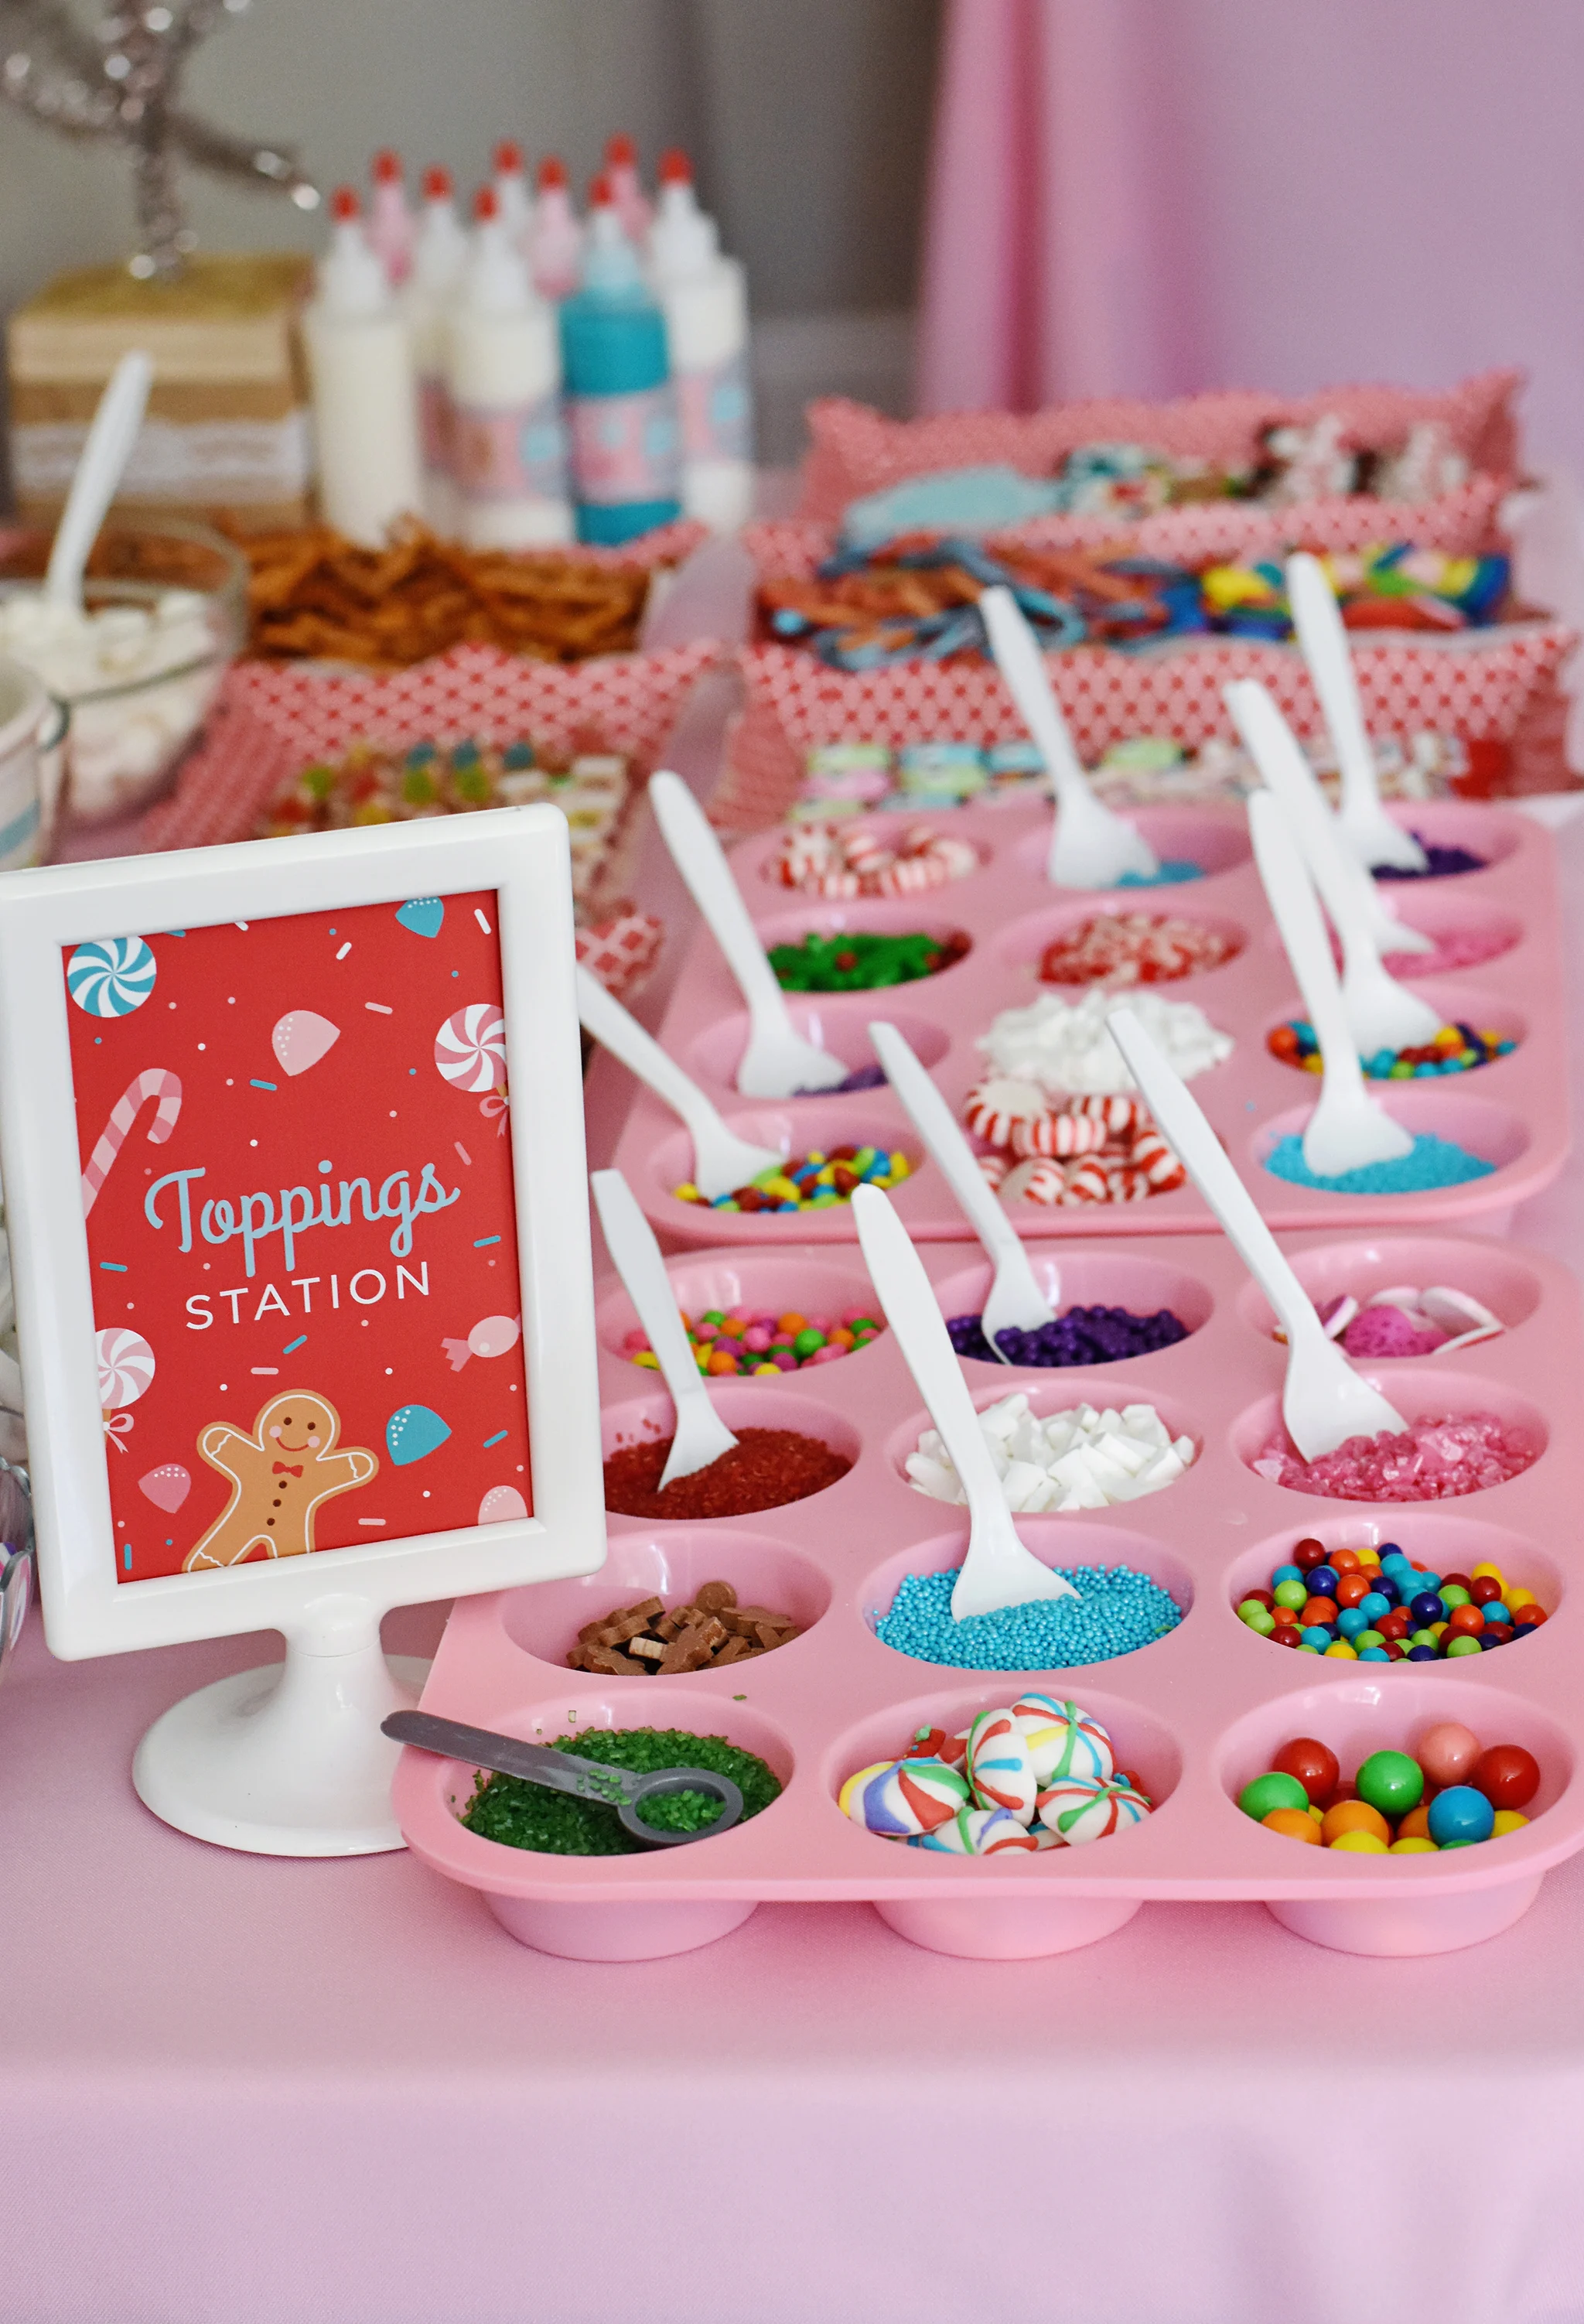 A Gingerbread House Party wouldn't be complete without a Toppings Station!